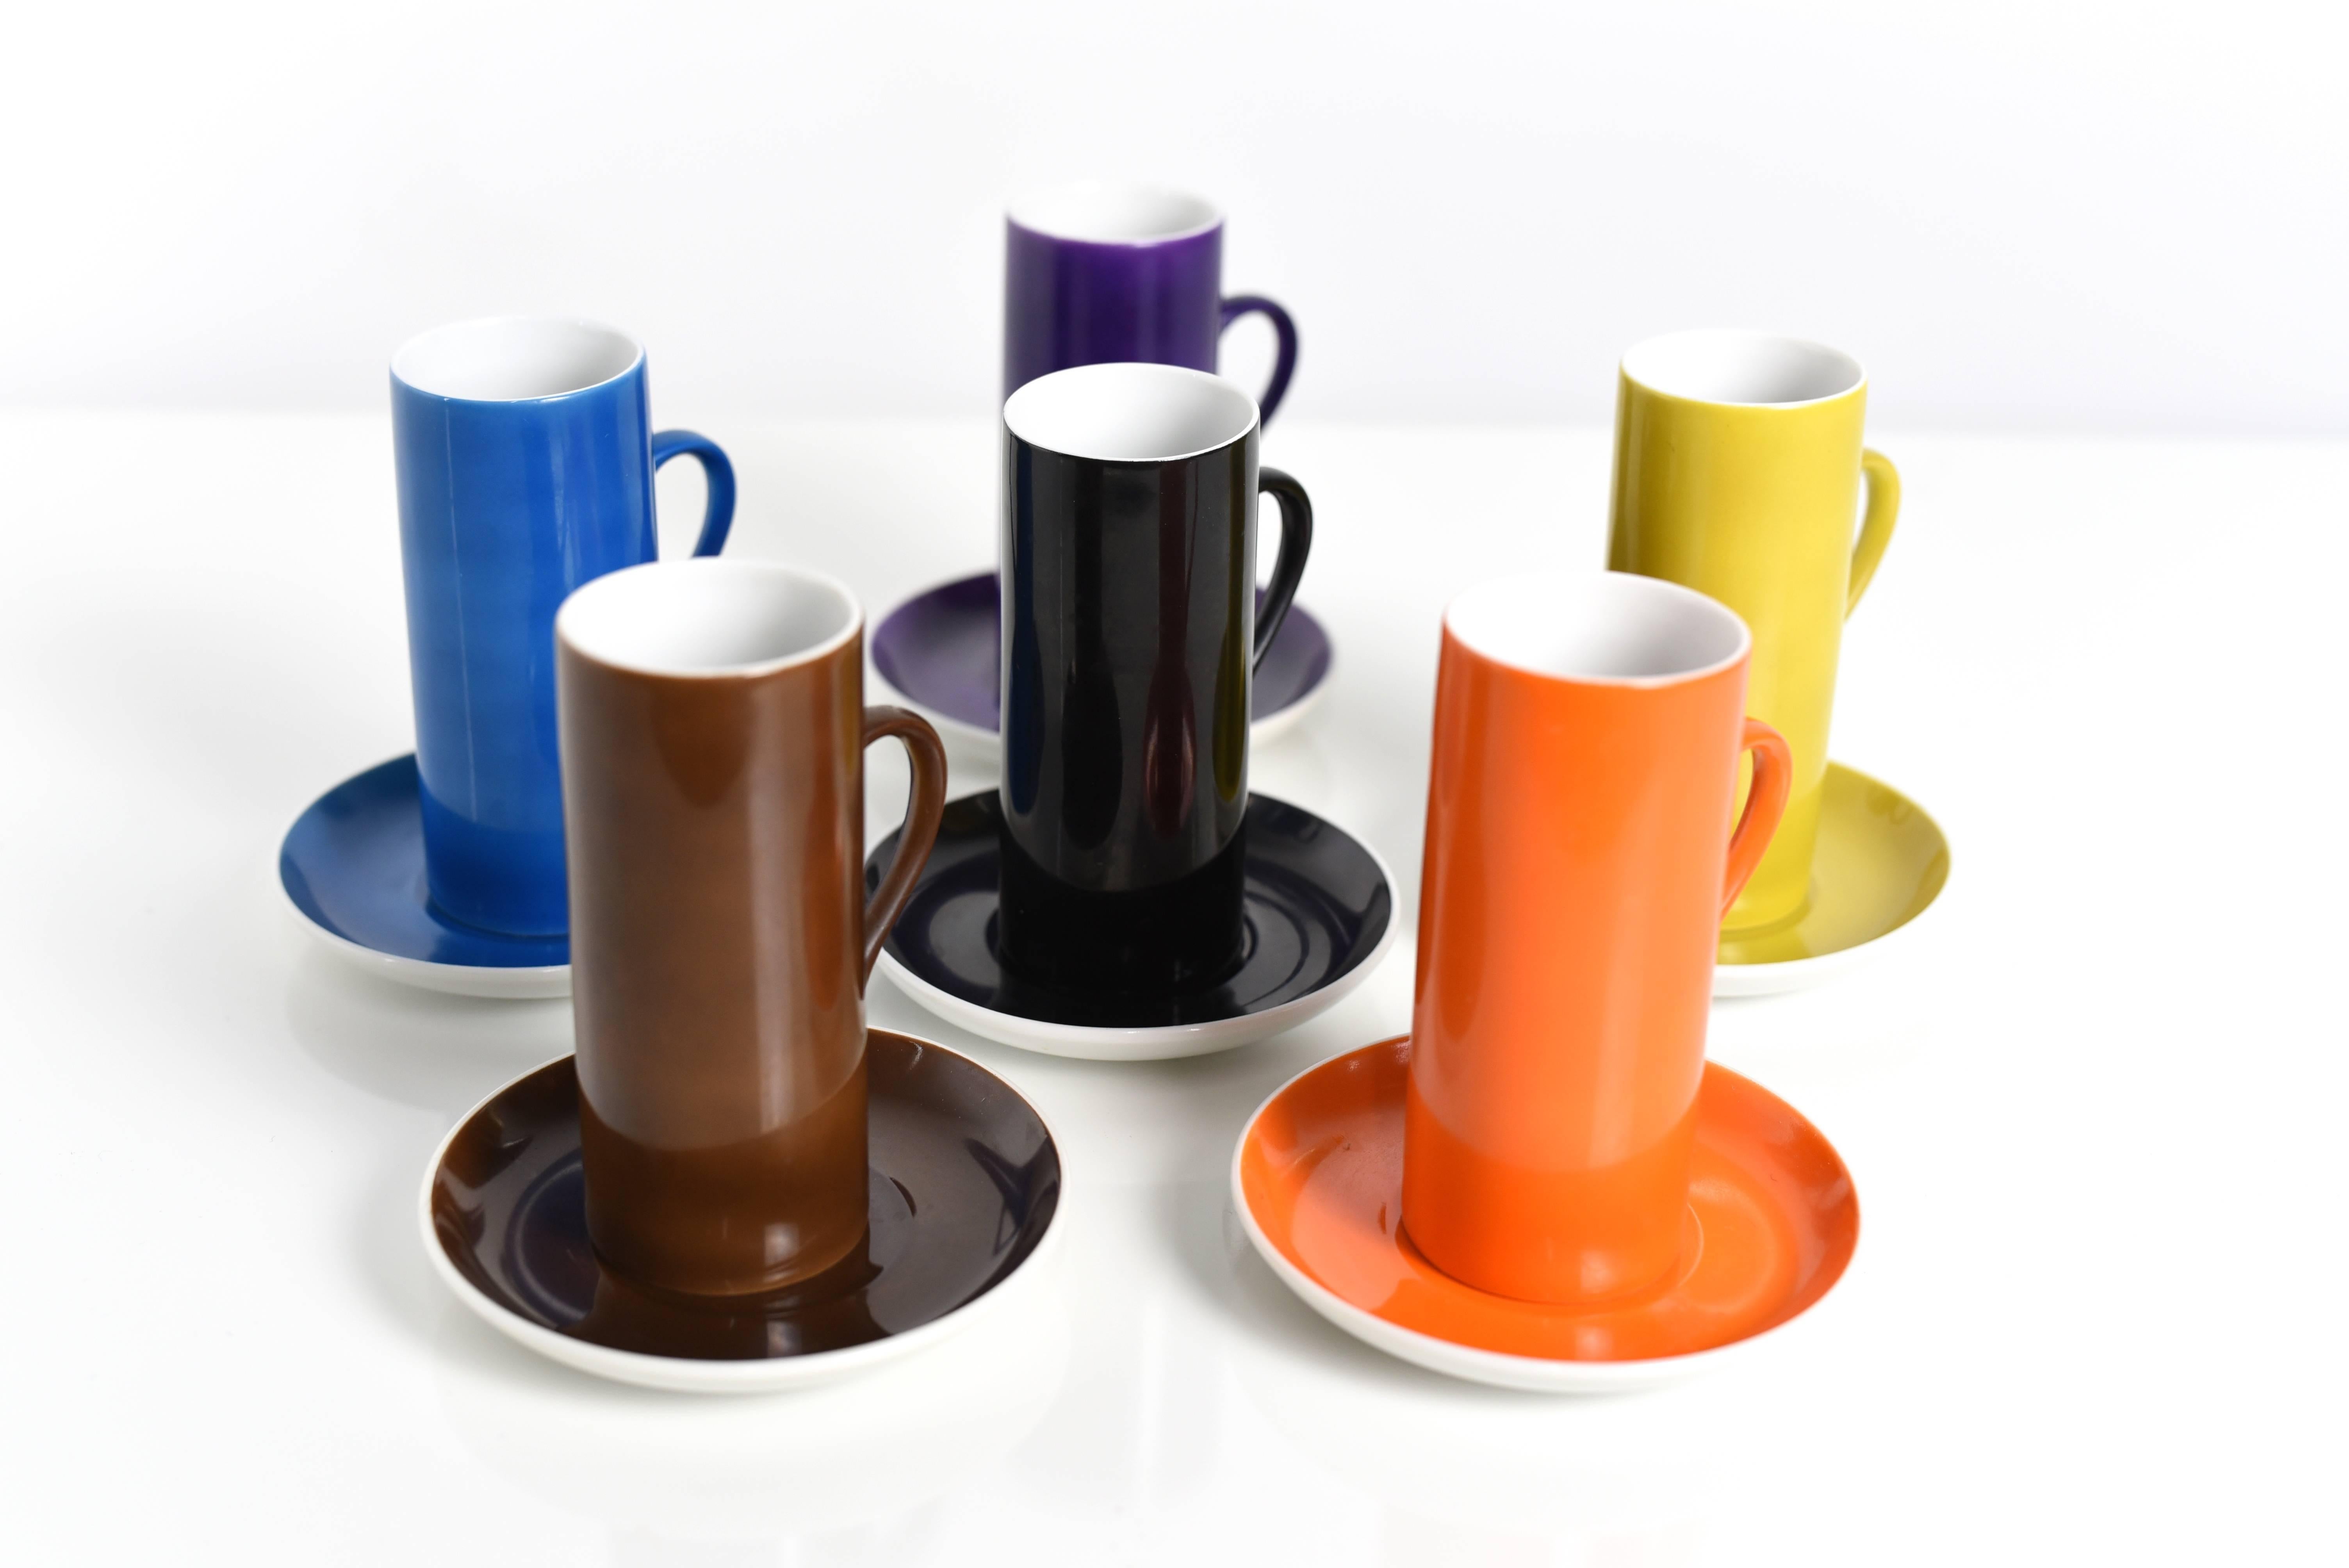 Lagardo Tackett Espresso/Demitasse cup set

Manufactured by Schmid, Japan, 1960s

Porcelain

Measure: Cup height 4.5